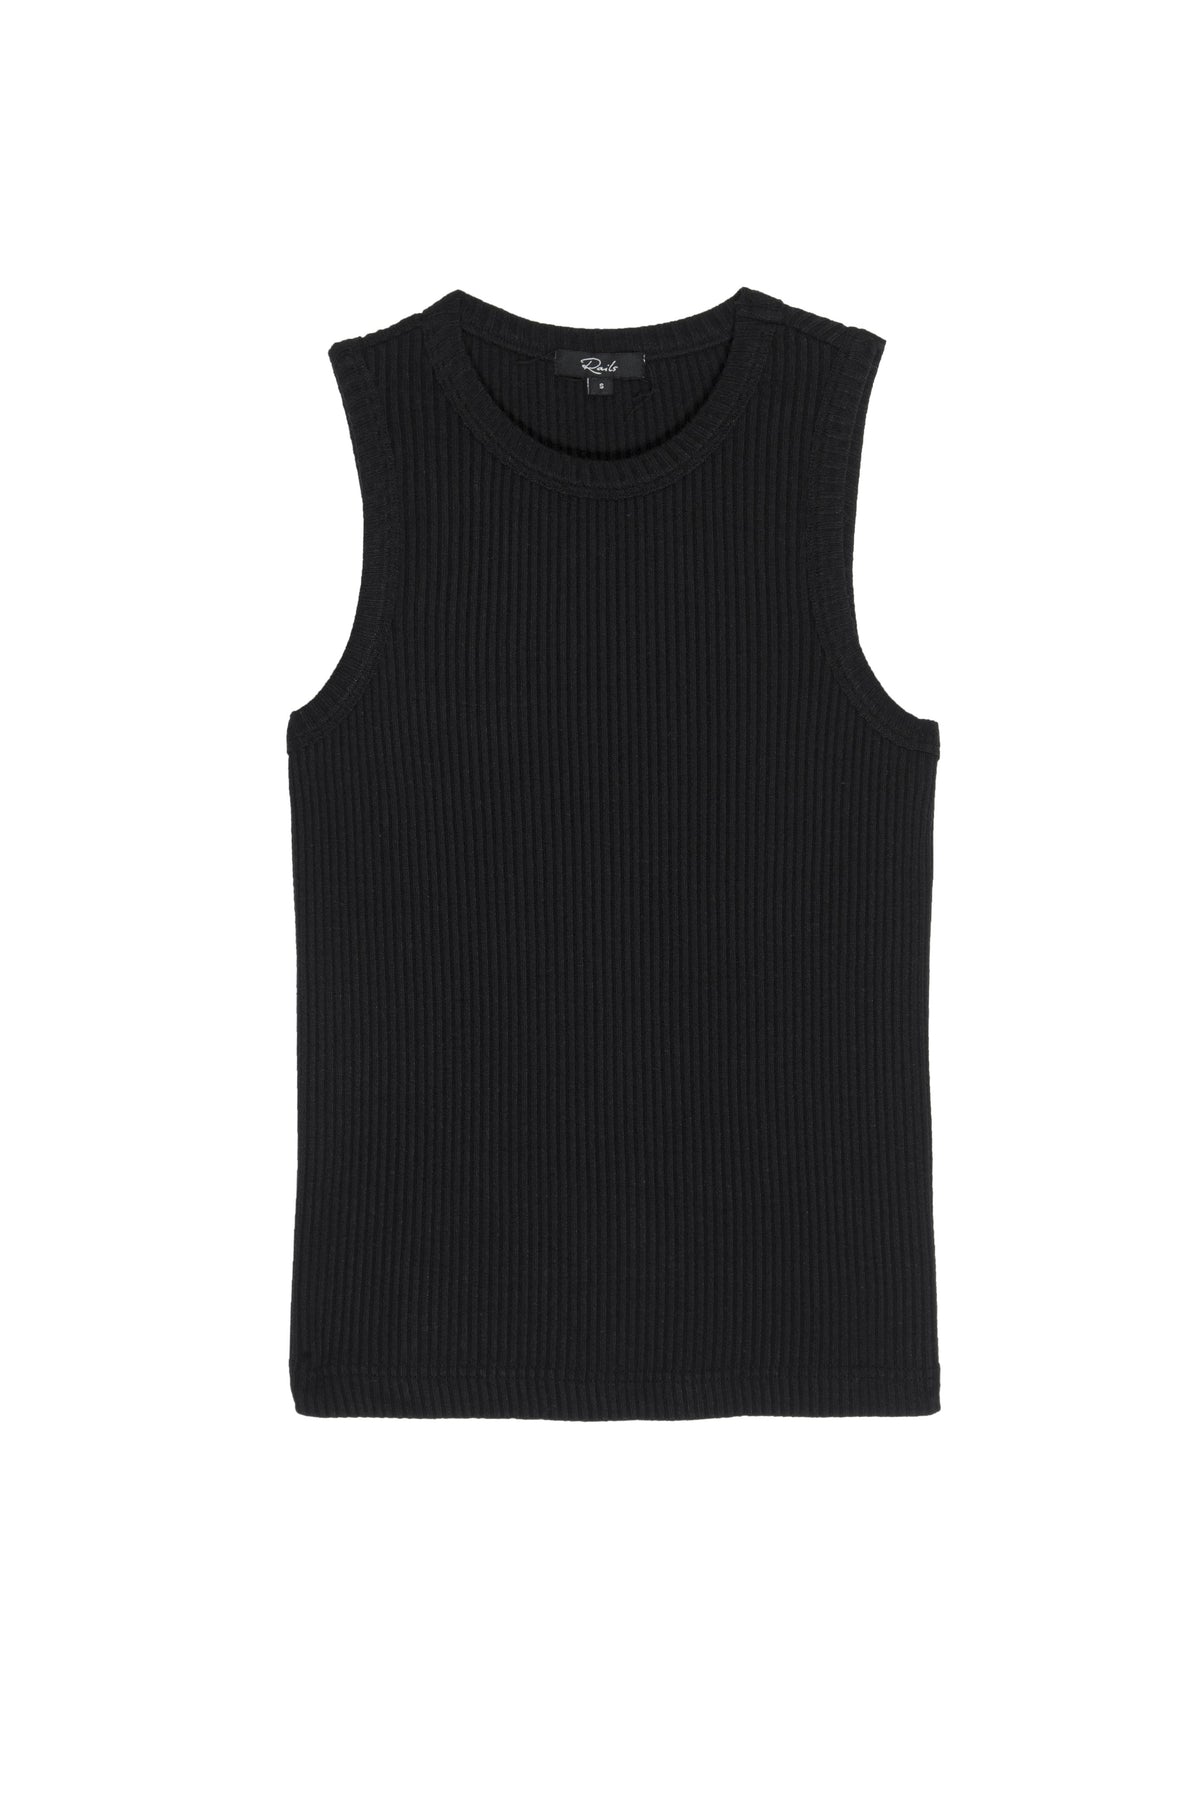 The Racer Tank - size S